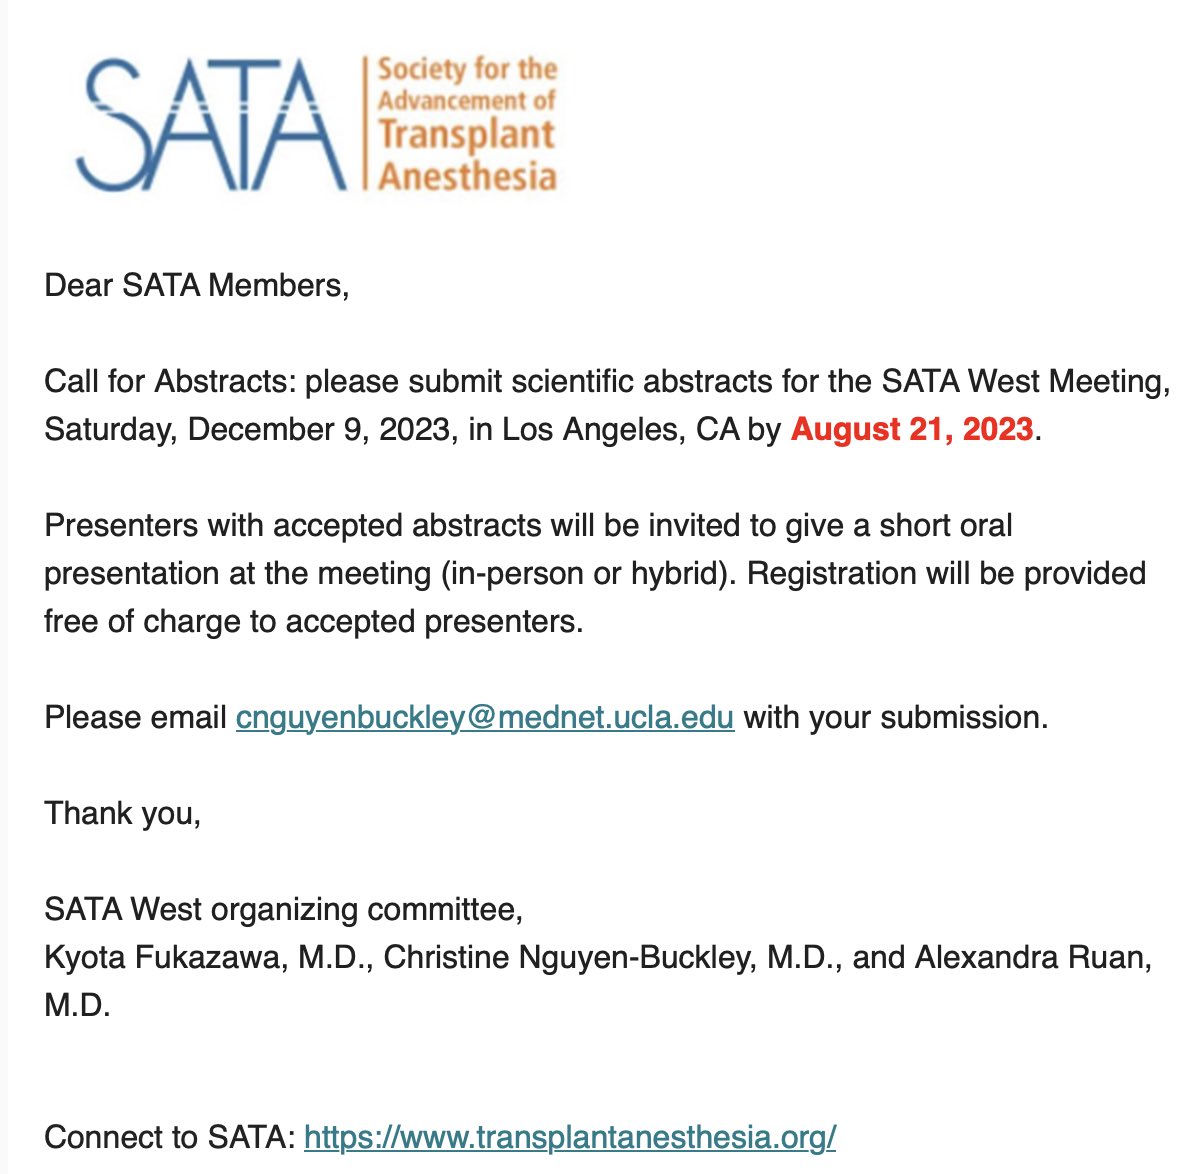 Call for Abstracts: please submit scientific abstracts for the SATA West Meeting, Saturday, December 9, 2023, in Los Angeles, CA by August 21, 2023 #transplant #anesthesia   Please email cnguyenbuckley@mednet.ucla.edu with your submission.